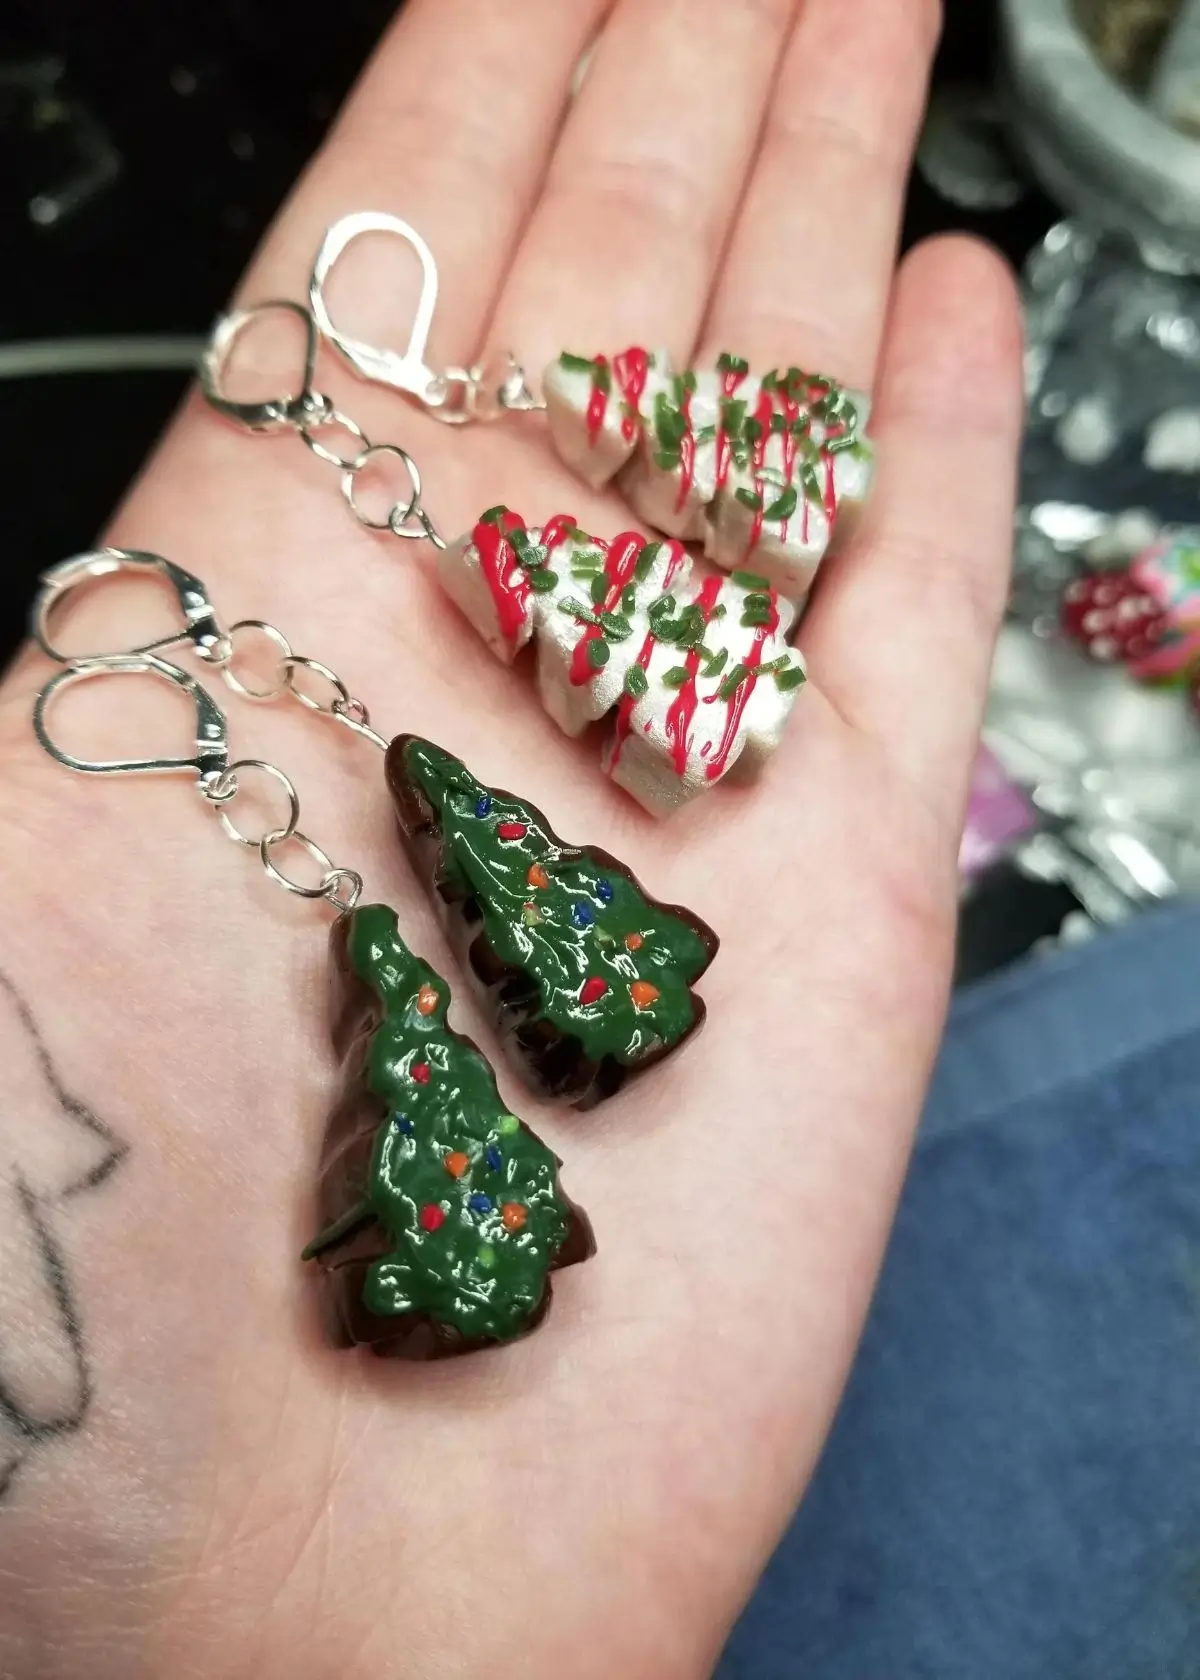 What type of Material are the Christmas Tree Cake Earrings Made of?